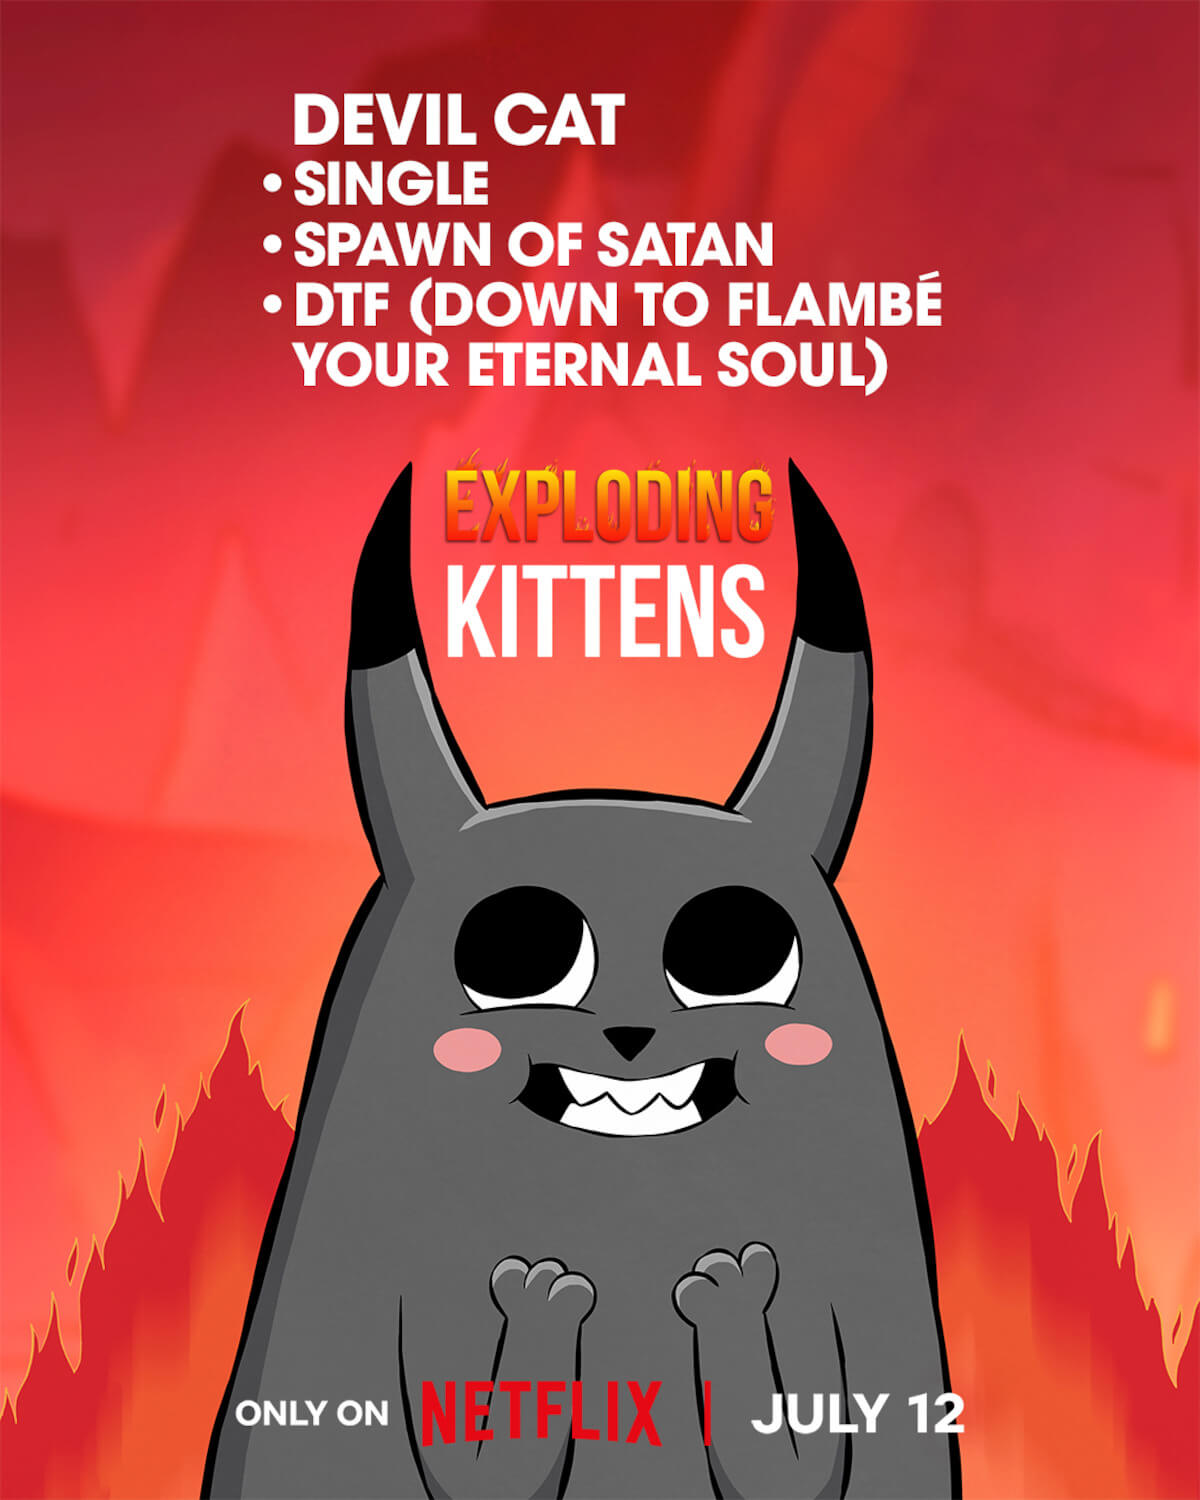 Devil Cat Poster Interview With Exploding Kittens Composers Shirley Song And Jina An